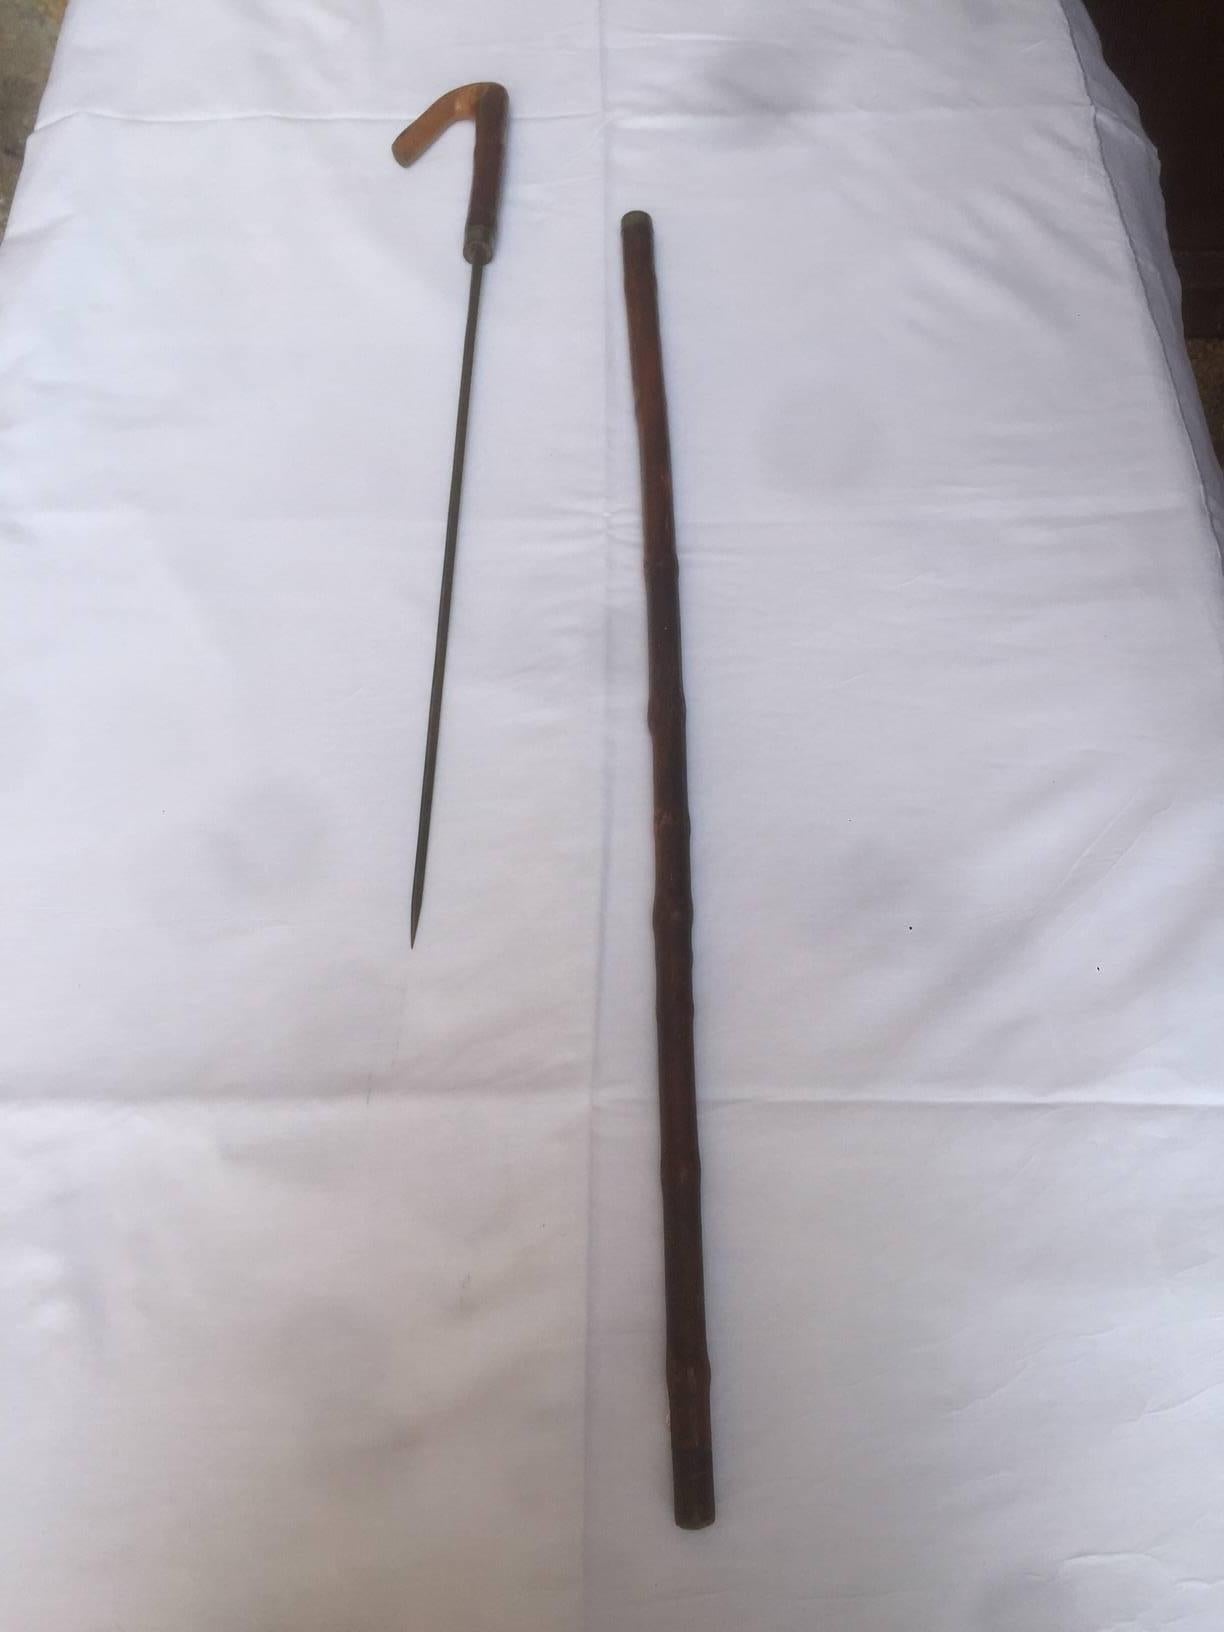 Very nice French bamboo Dagger Cane. The dagger is hiding by the lower part of the cane.